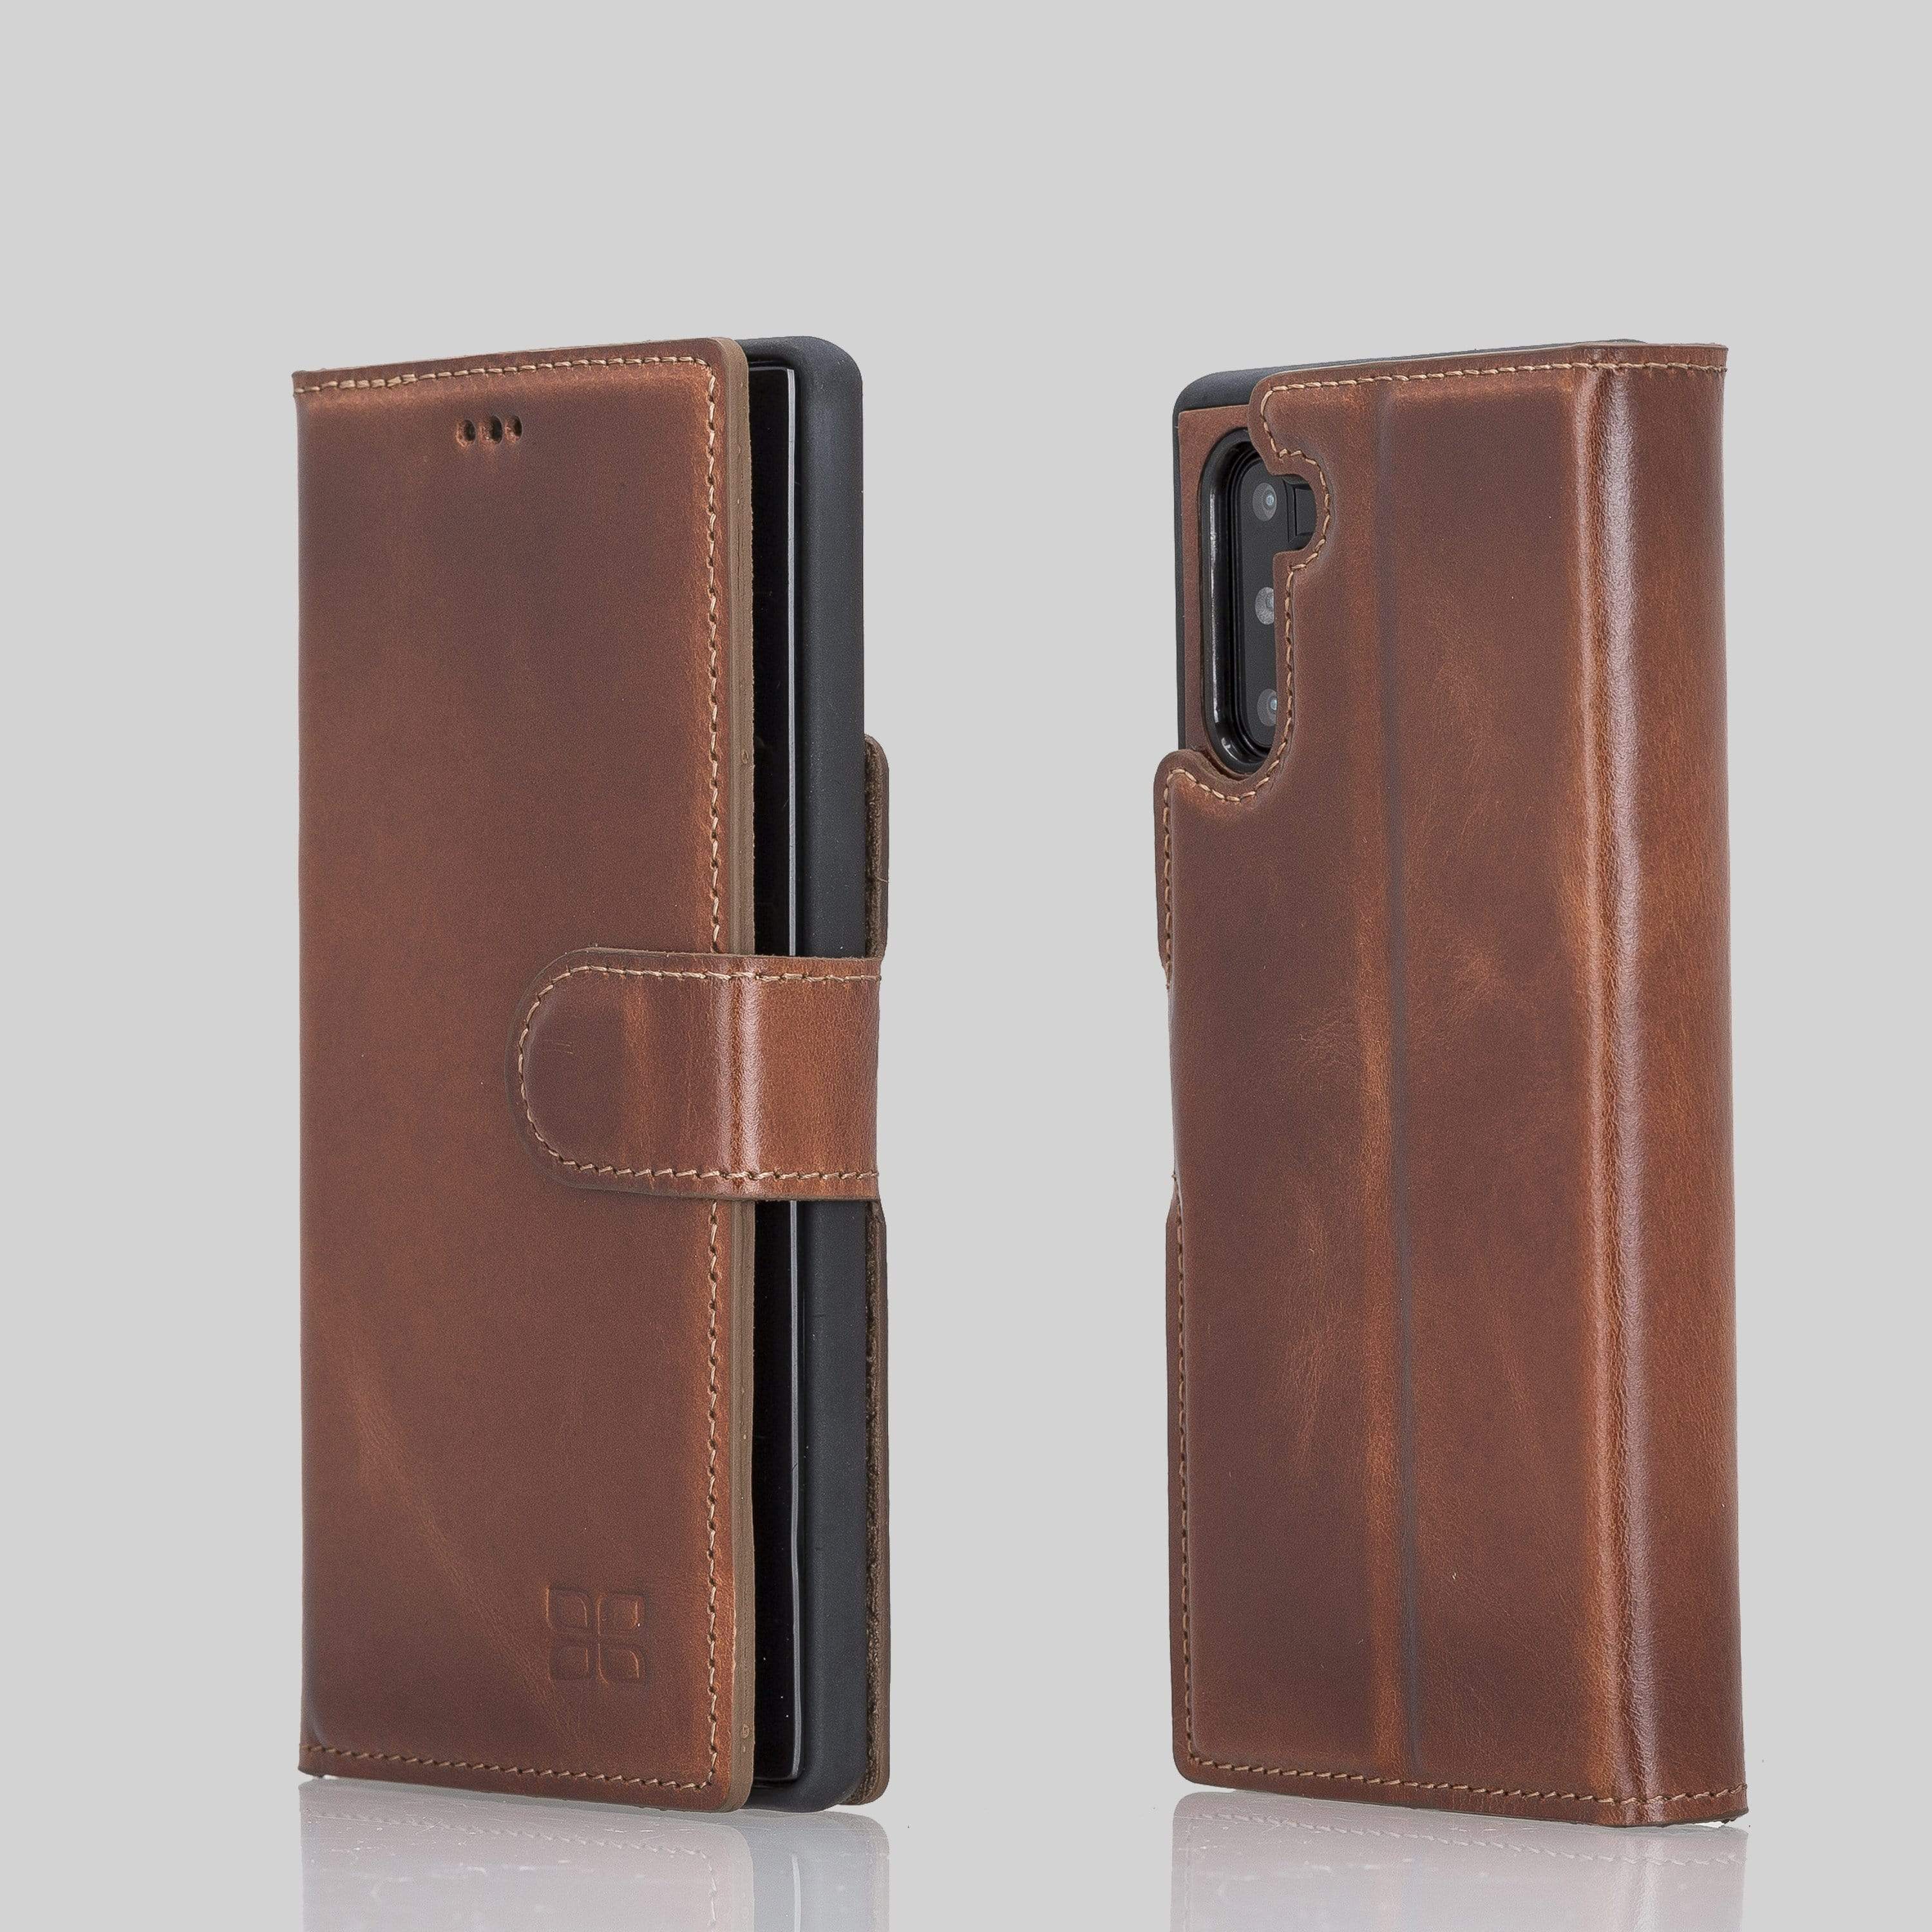 Phone Case Magnetic Detachable Leather Wallet Case for Samsung Note 10 - Rustic Tan with Effect Bouletta Shop